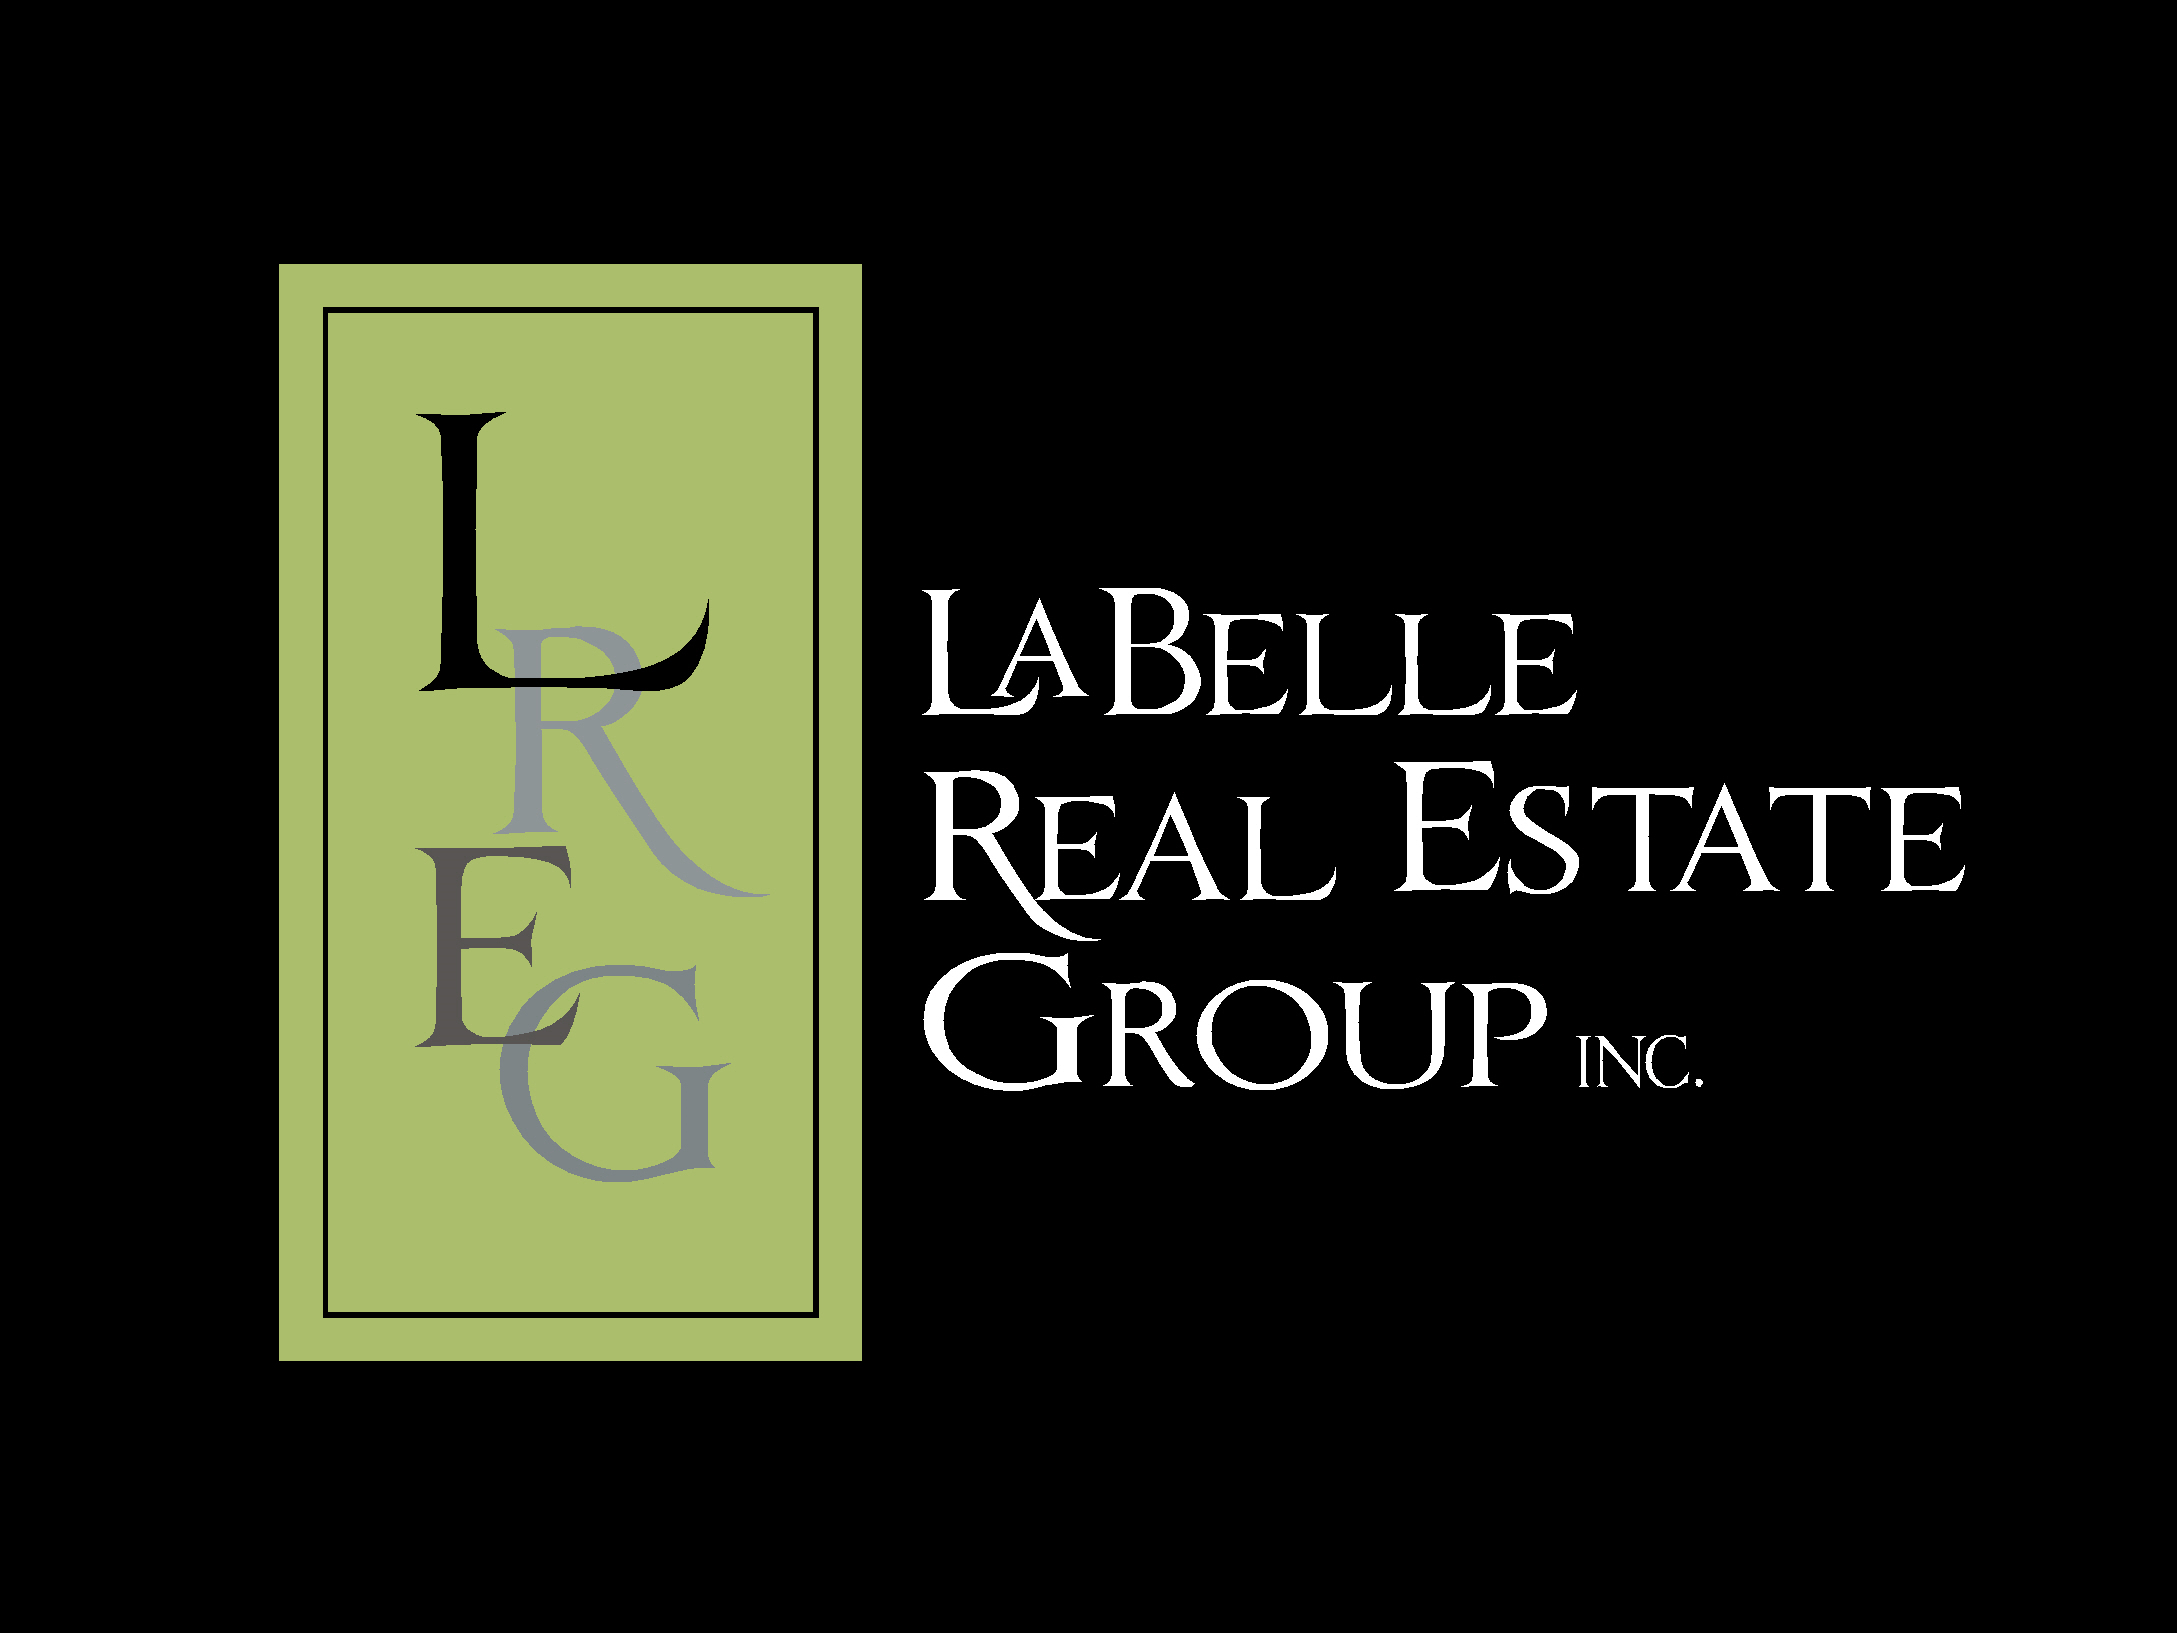 LaBelle Real Estate Group Company Logo